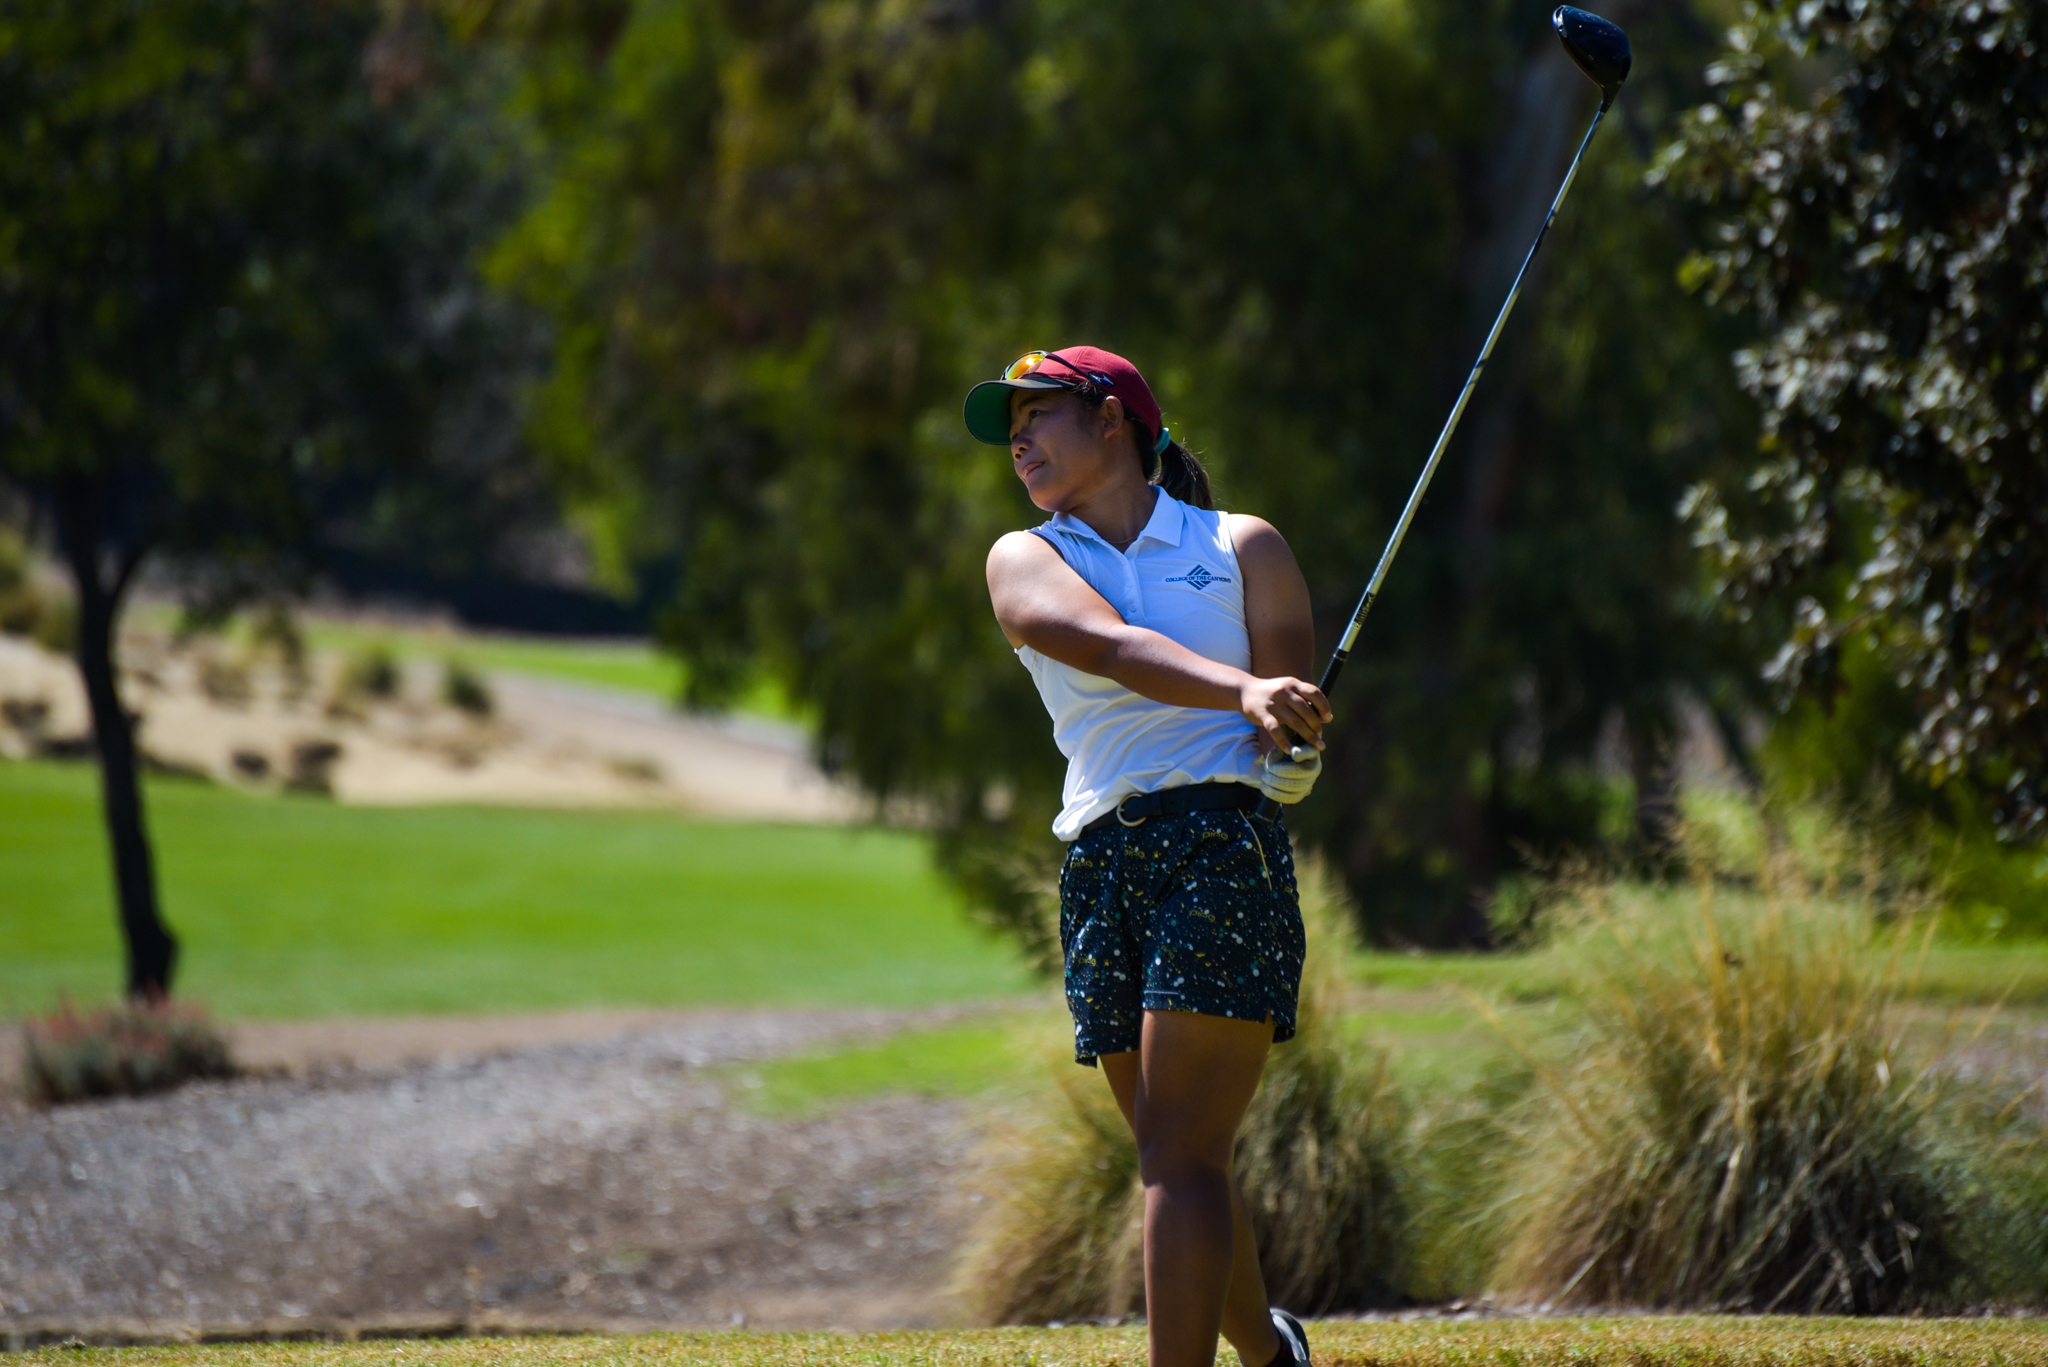 College of the Canyons women's golf student-athlete Motoko Shimoji at the WSC event on Monday, Sept. 26, 2022.